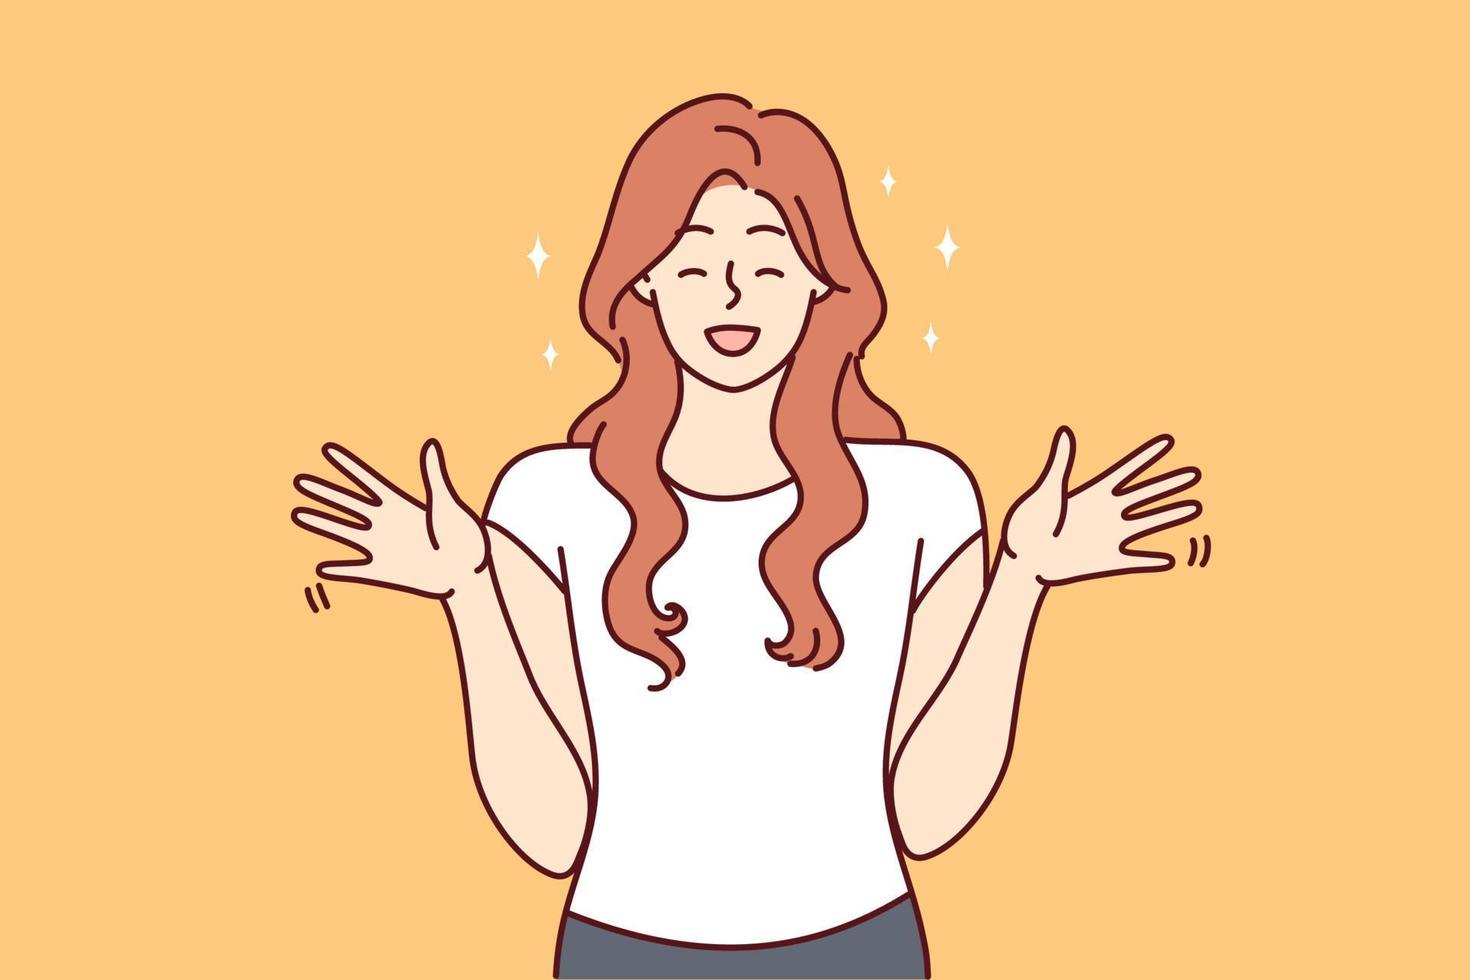 Excited young redhead woman feeling euphoric and overjoyed. Smiling female feel joyful and positive show emotions. Vector illustration.